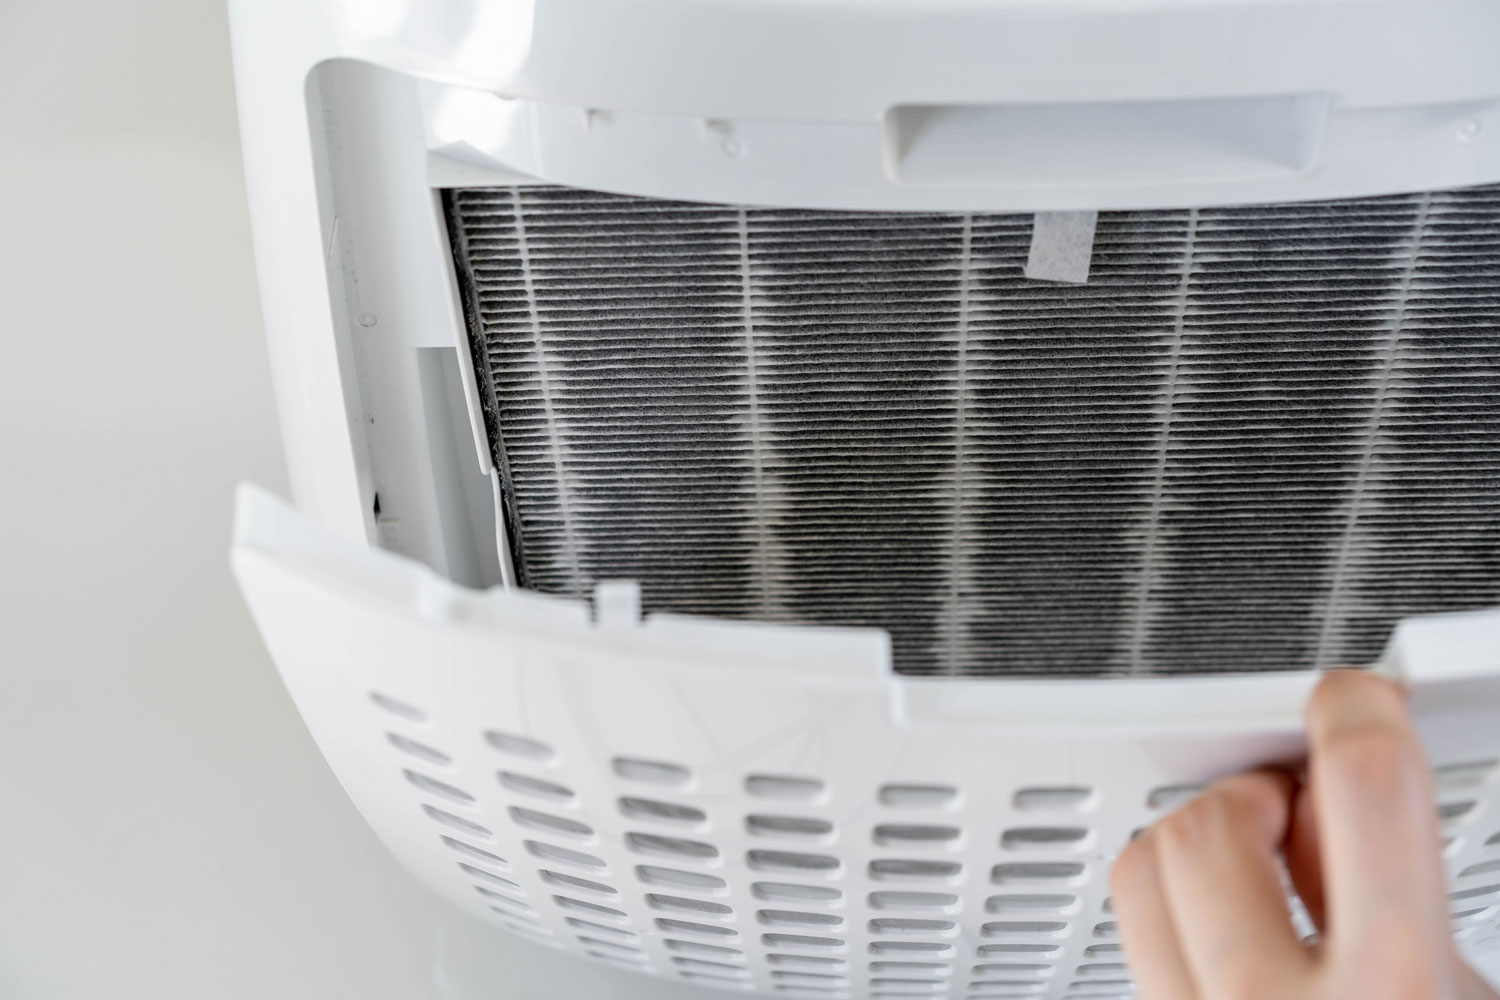 Replacing the air filter of a portable air conditioning unit